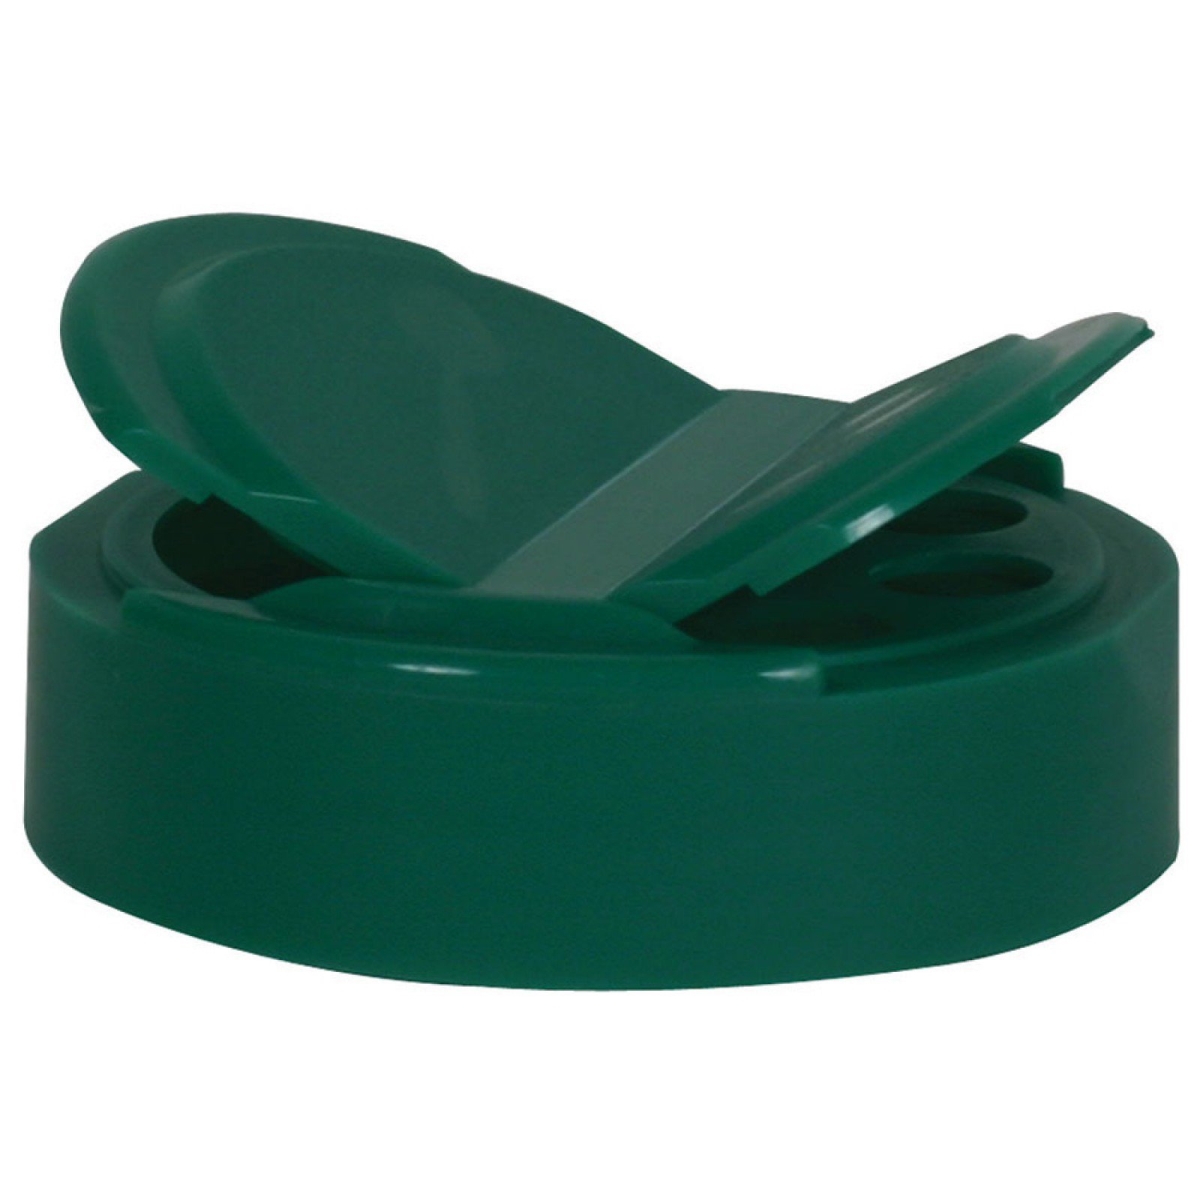 19201 Green Pourable Lid For 1 Quart Plastic Container